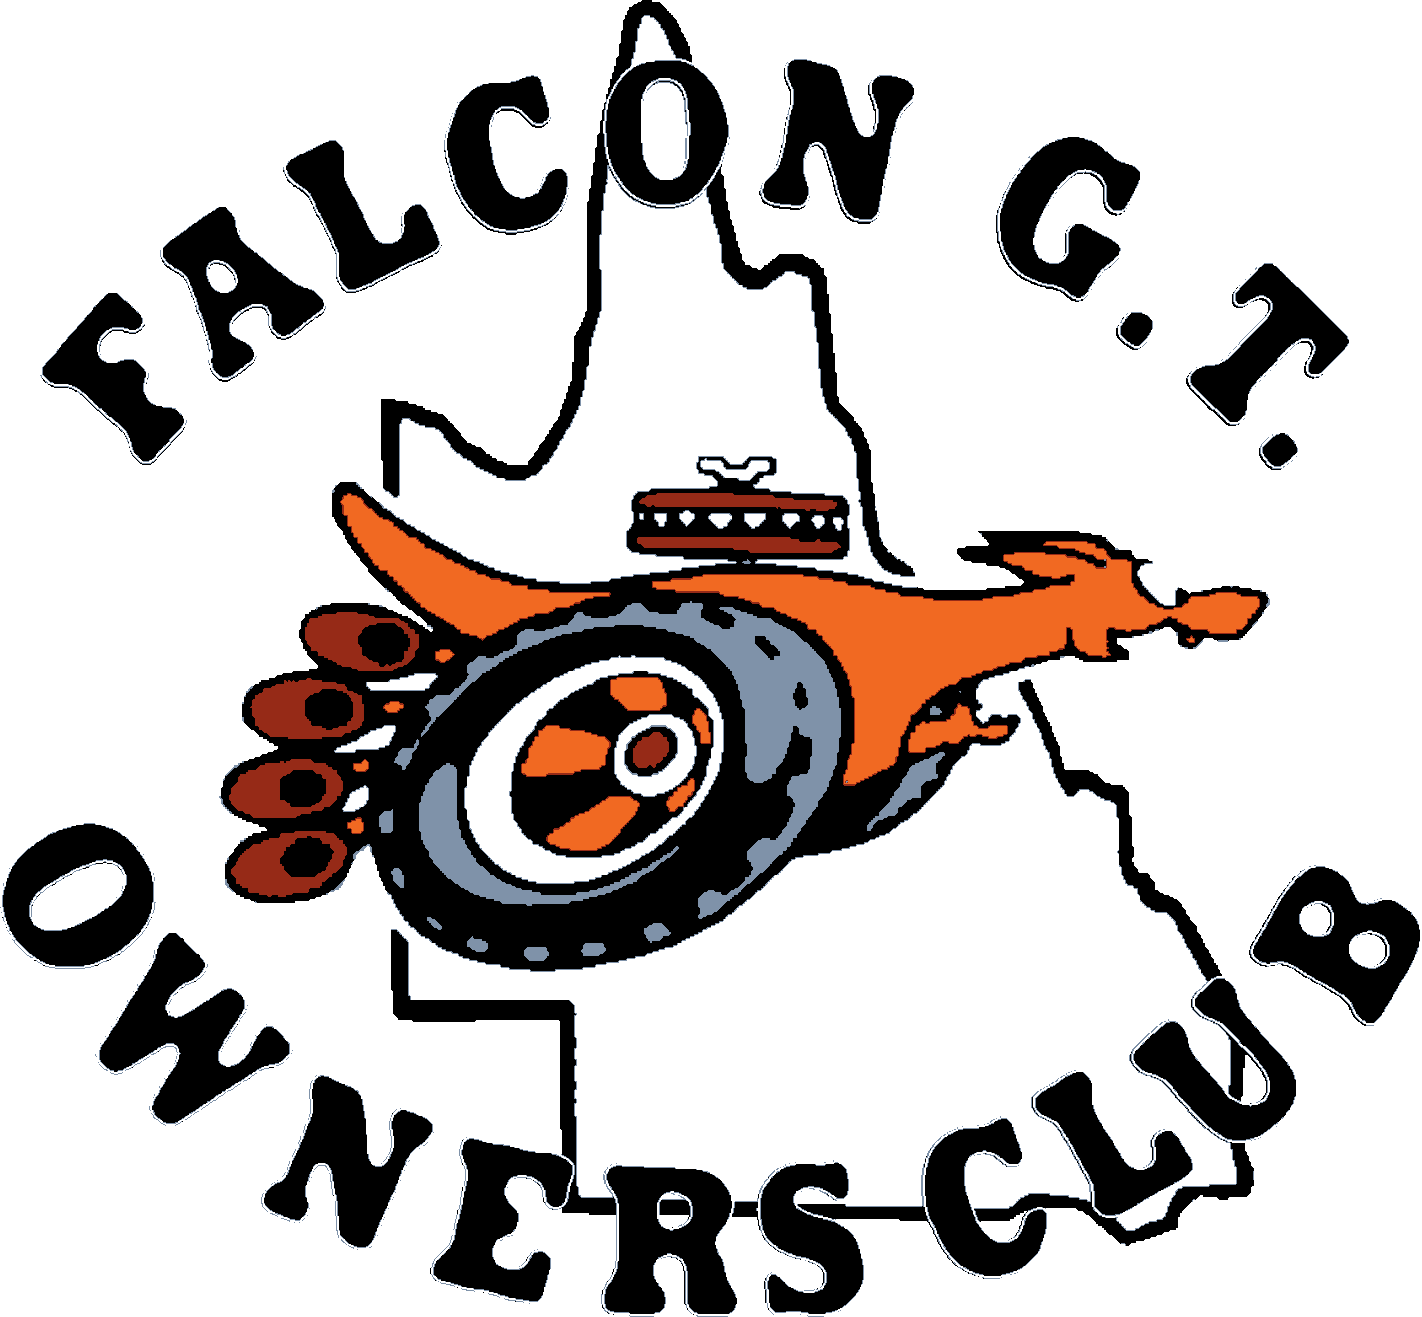 Falcon GT Owners Club of Qld Inc.